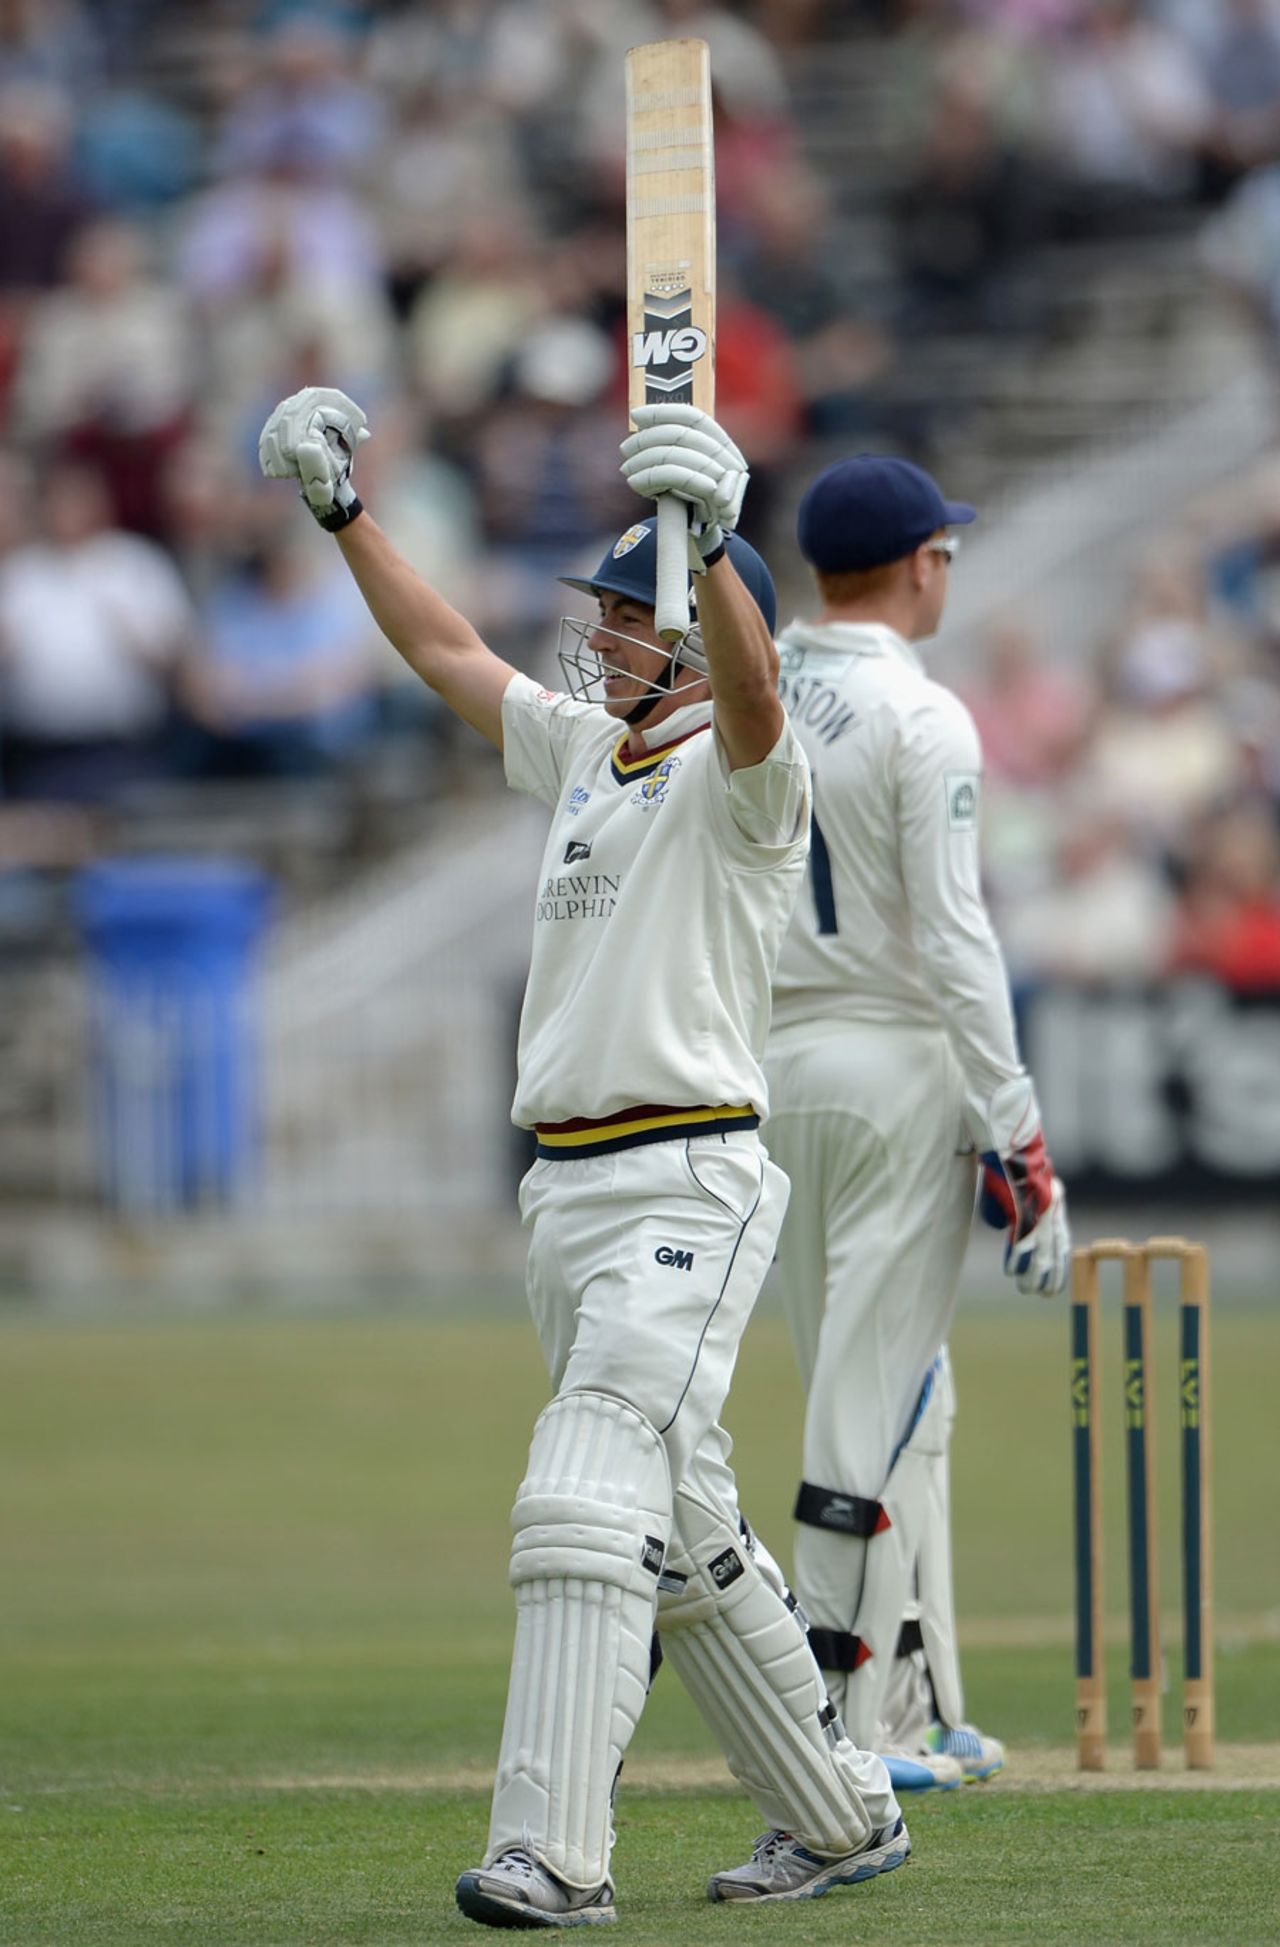 Michael Richardson celebrates after reaching his hundred with a six, Yorkshire v Durham, County Championship, Division One, Scarborough, 2nd day, August 29, 2013